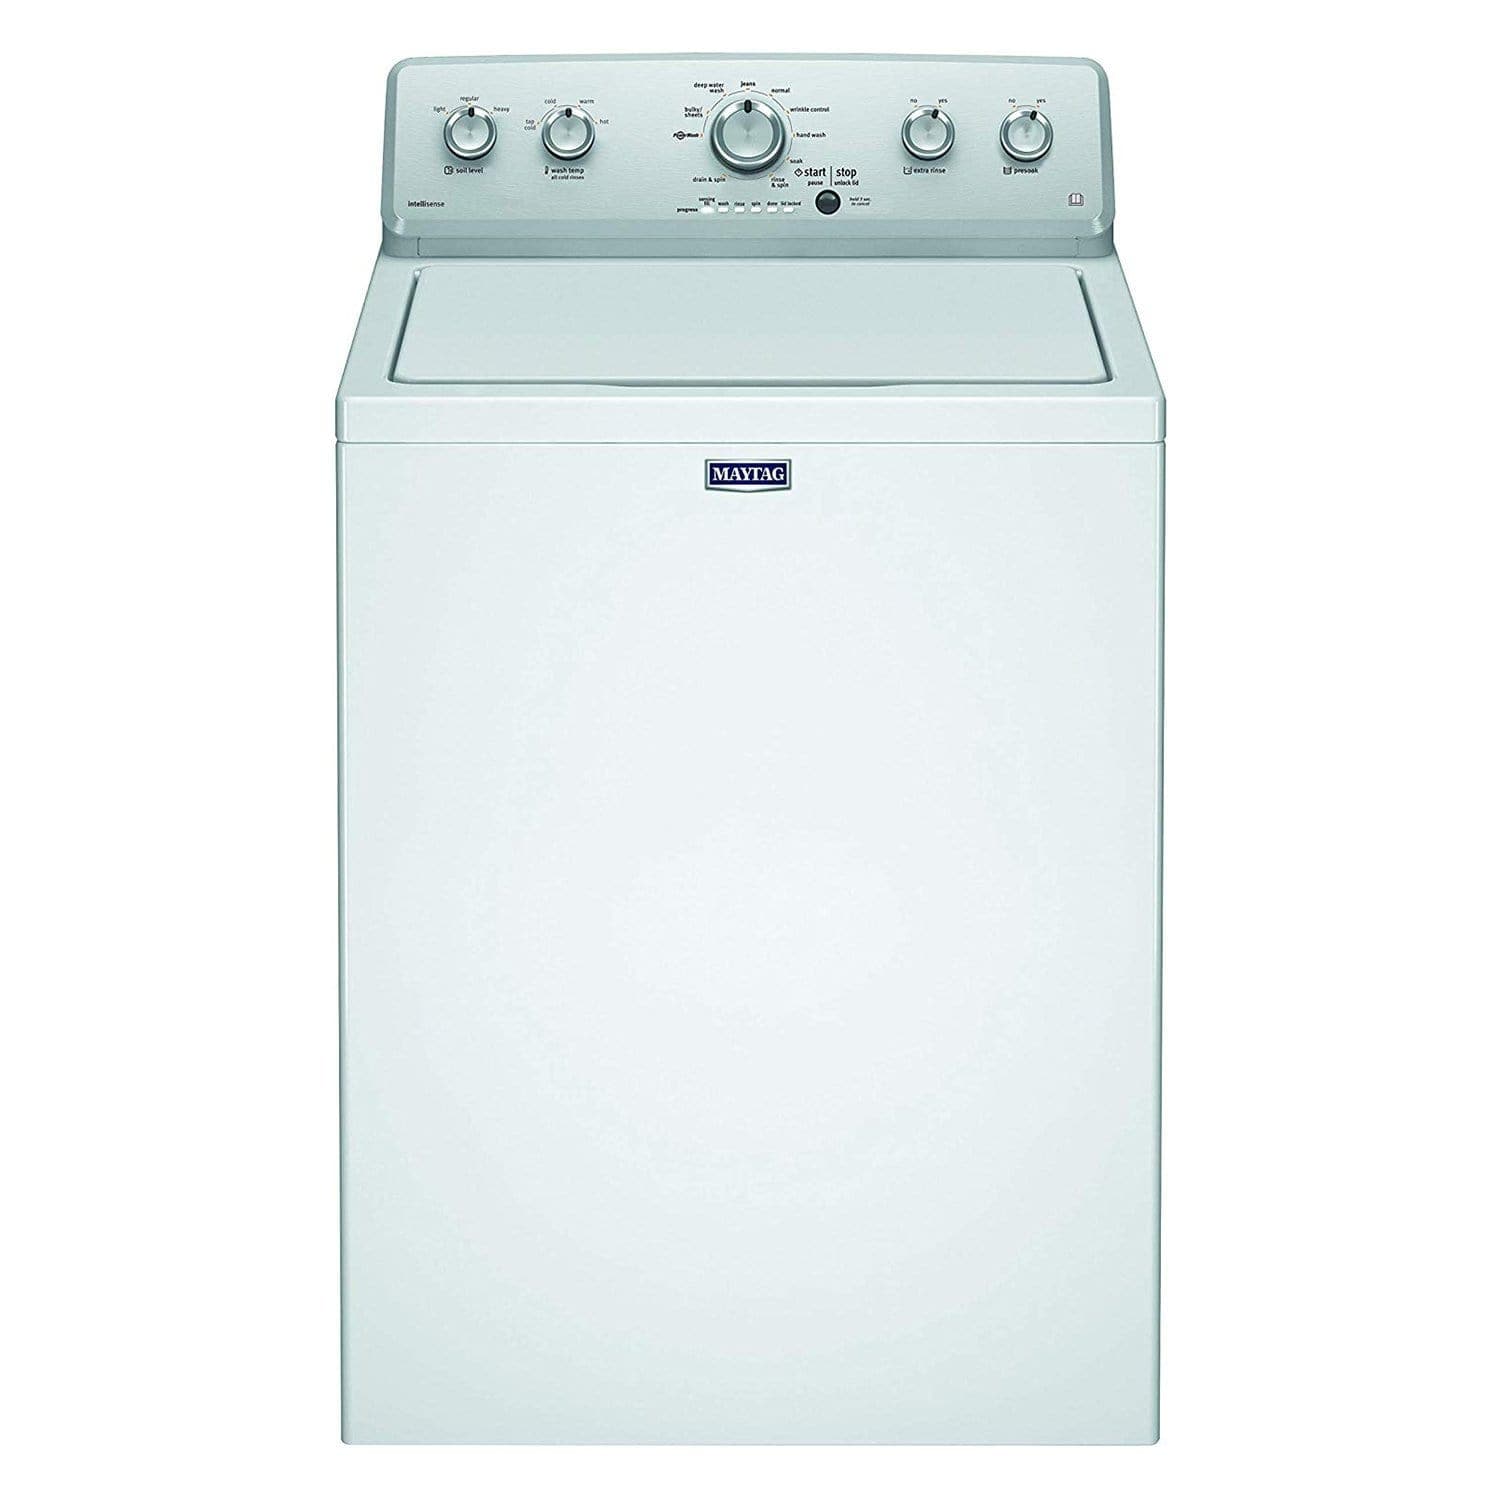 Maytag Top Load Fully Automatic Washing Machine - White - 3LMVWC415FW - Jashanmal Home